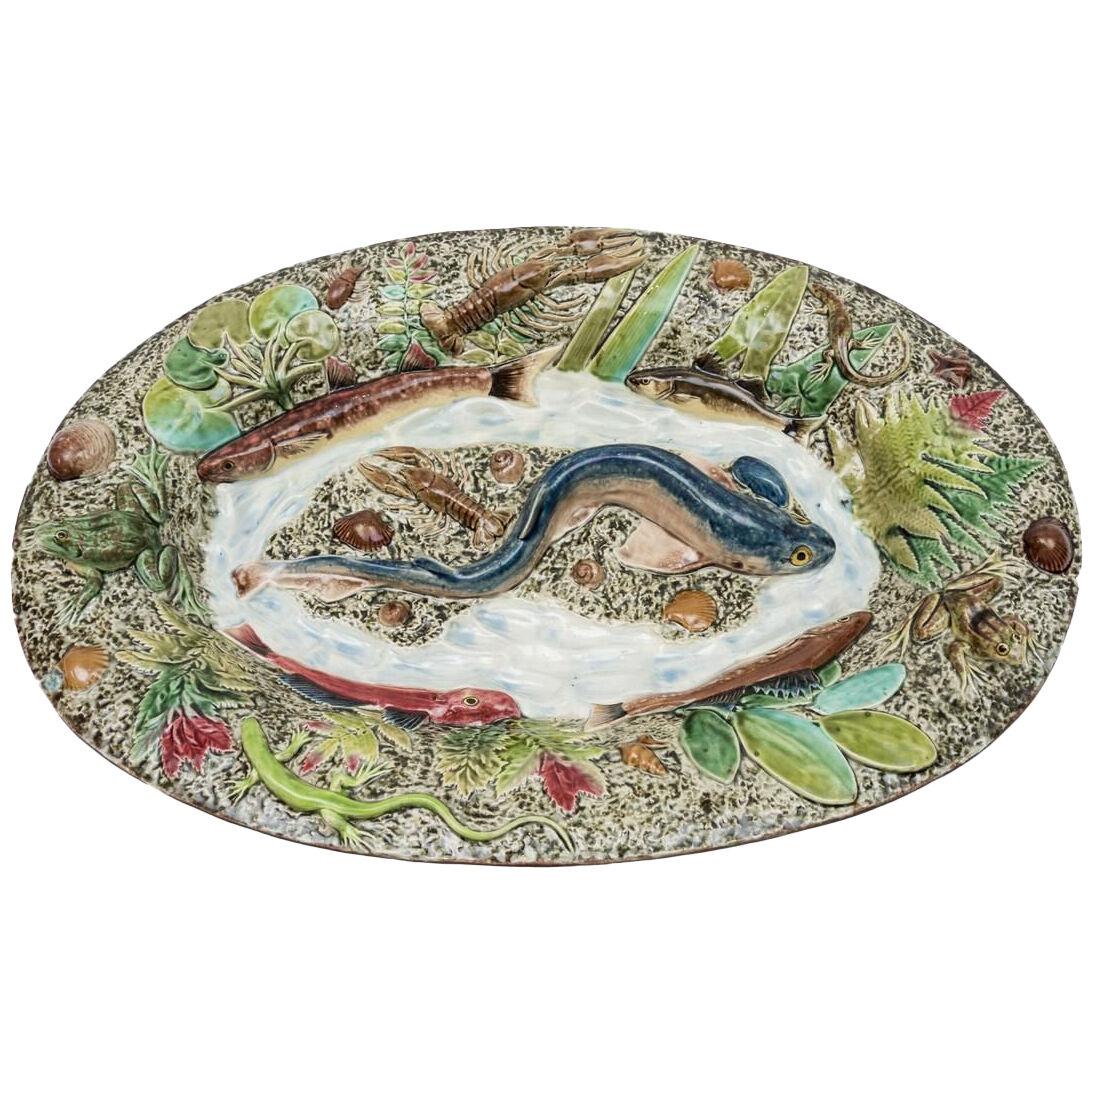 Palissy-Style Dish with a fish, Choisy-le-Roi, France, late 19th Century